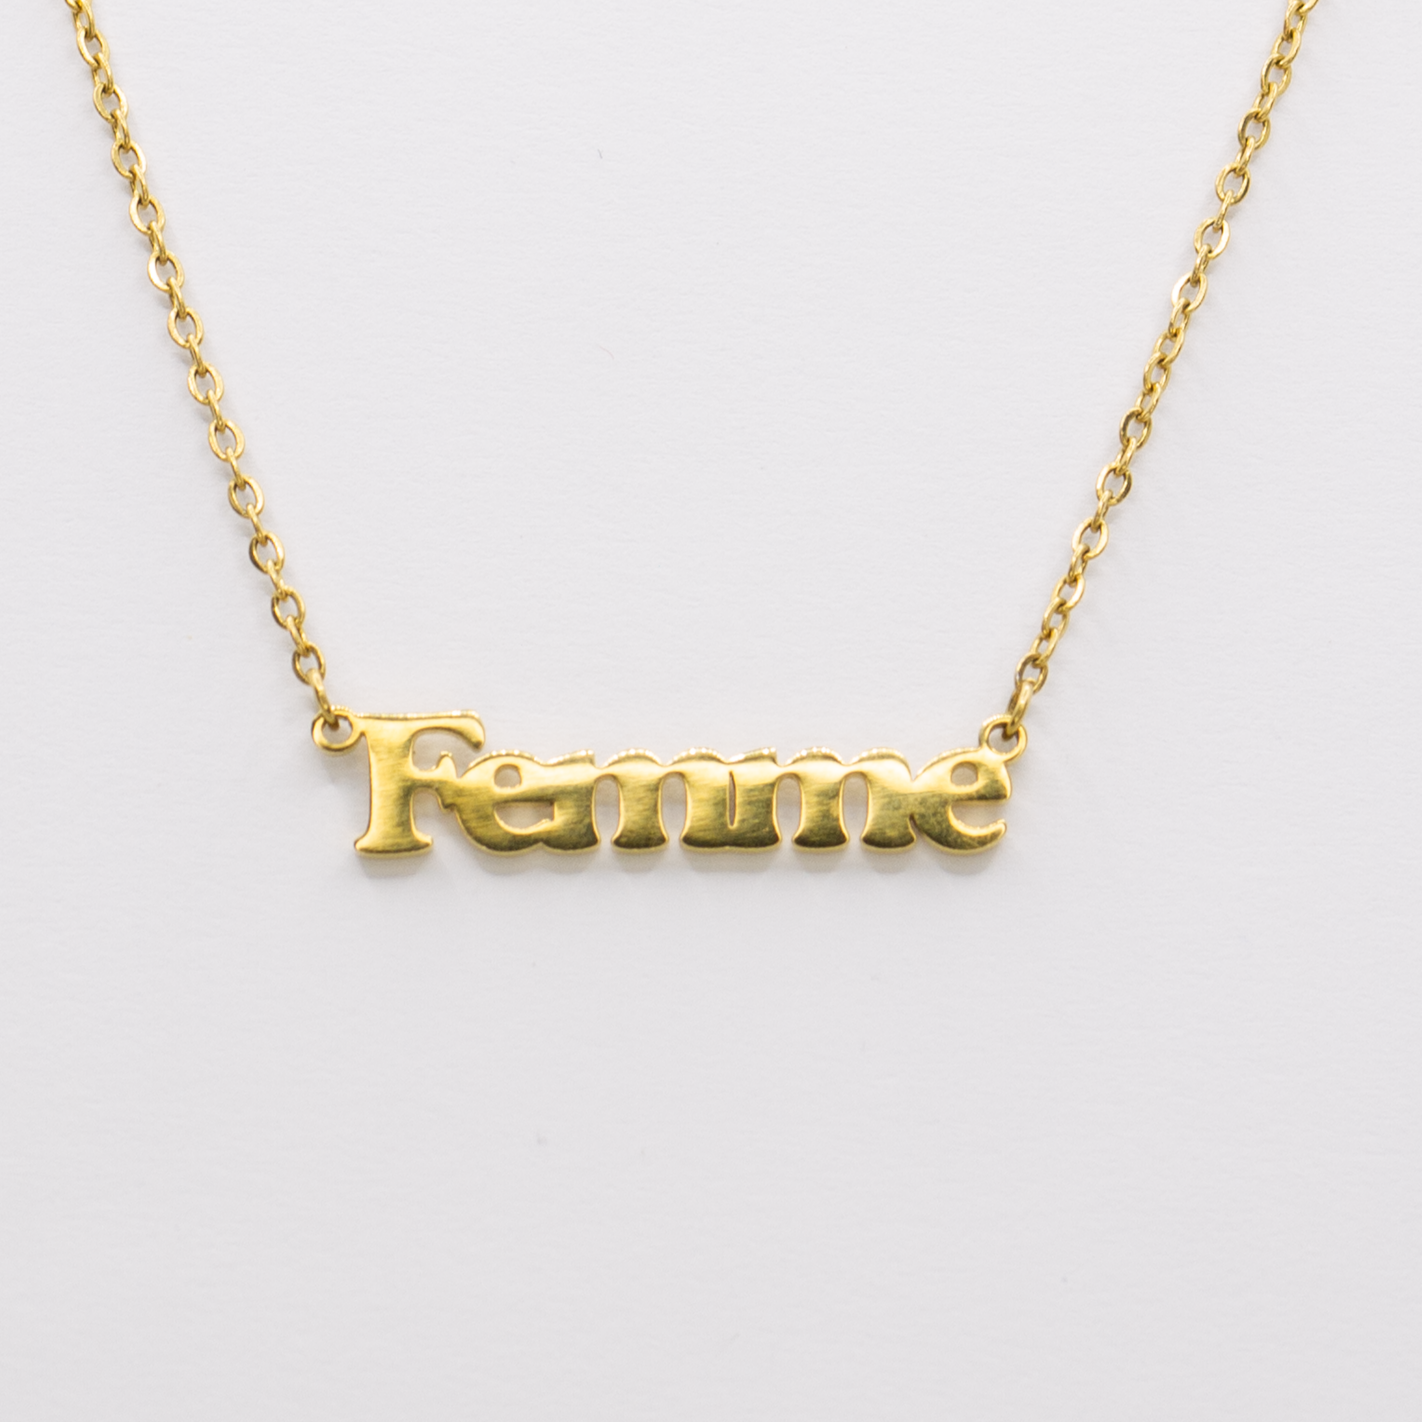 AuLaLa Cheeky Words Necklaces - Femme